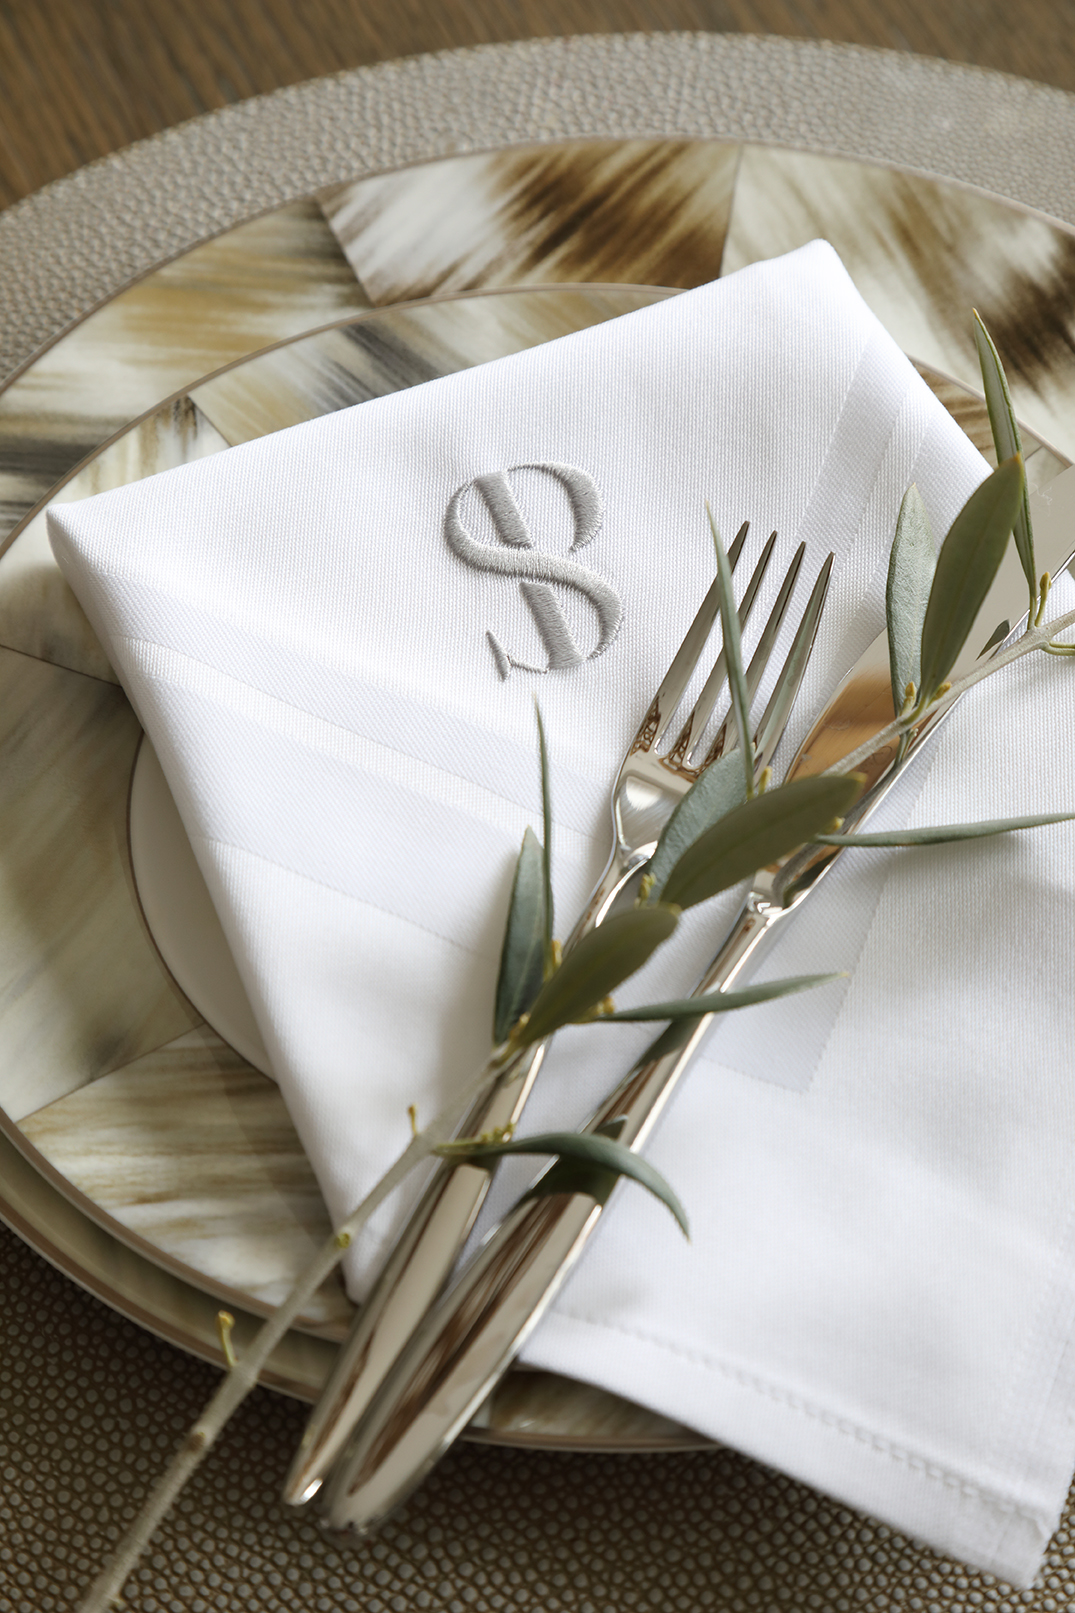 Monogrammed napkin on a patterned plate with fork and olive twig